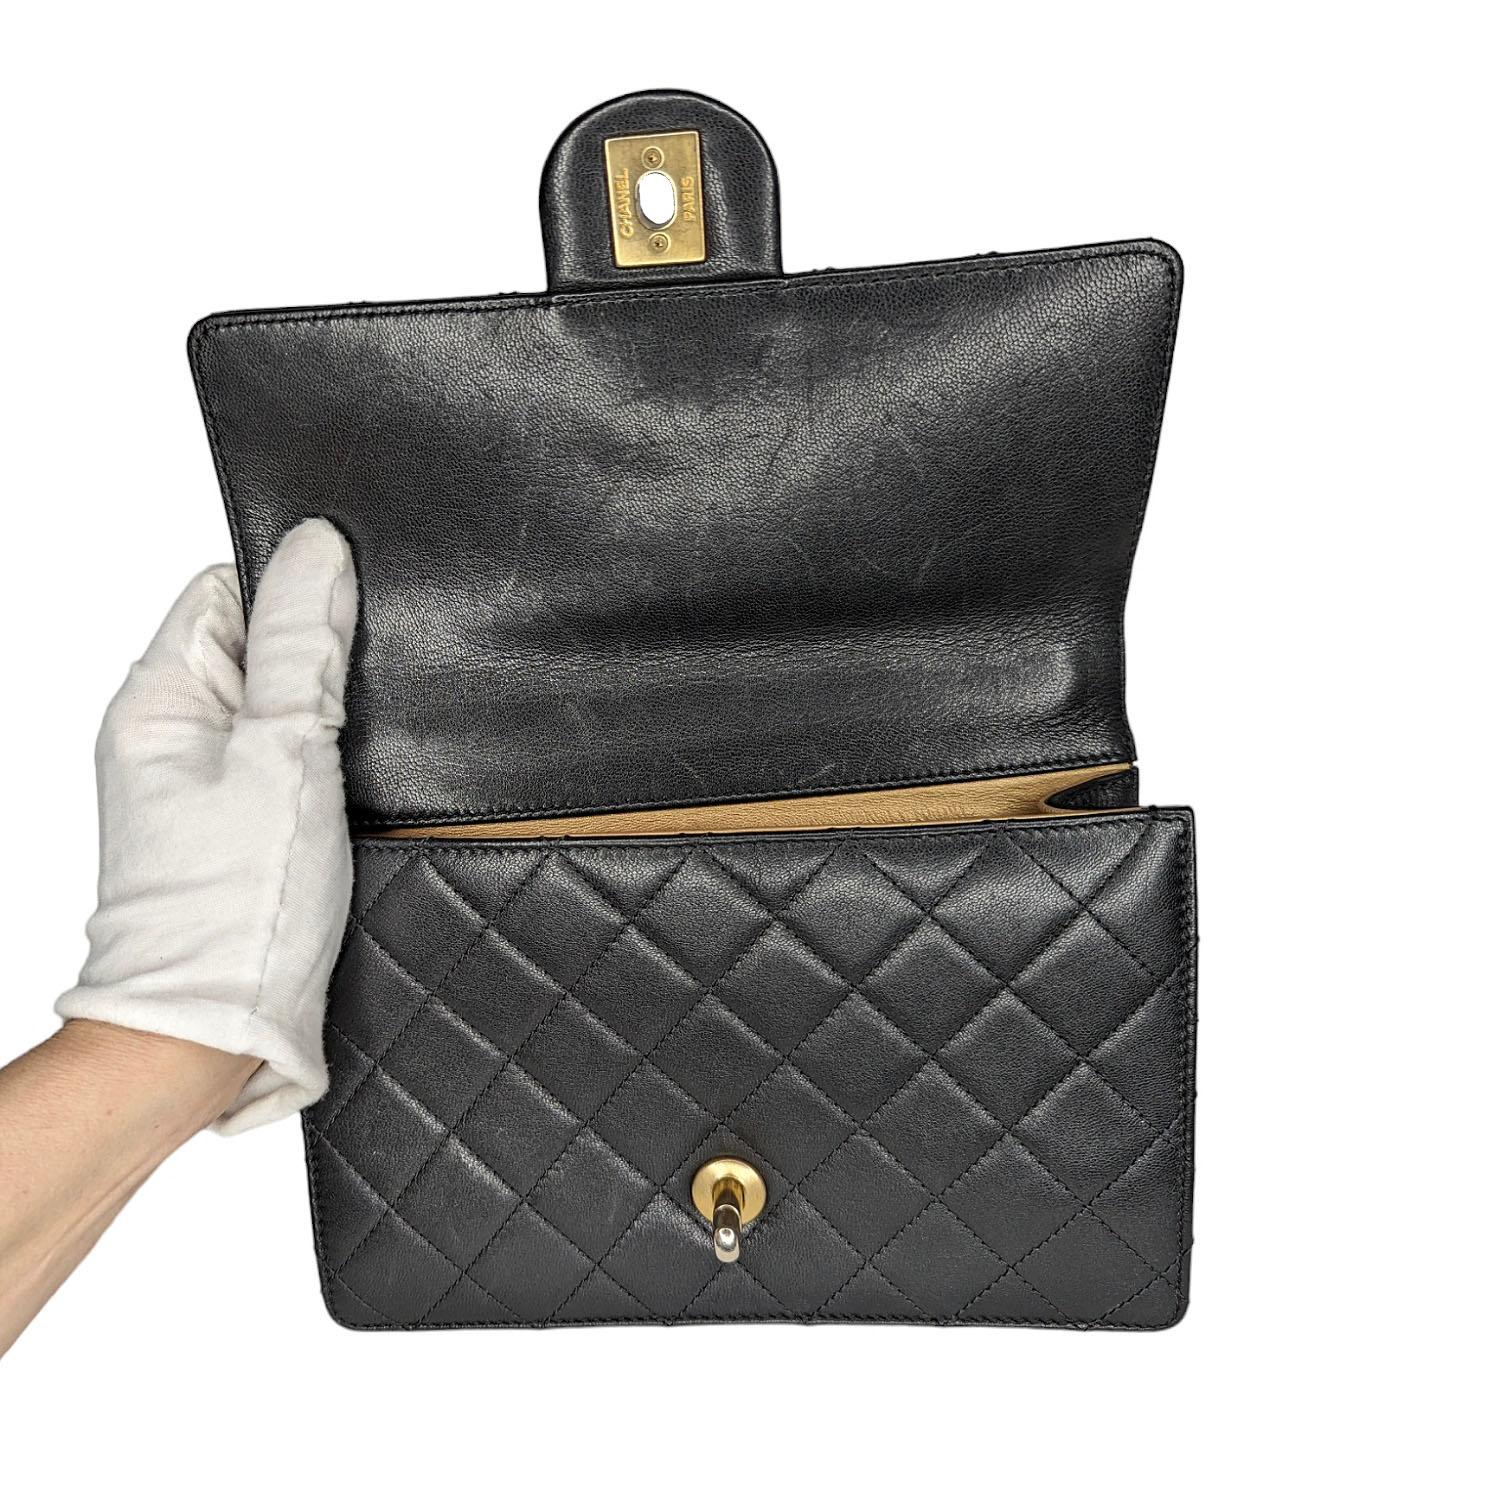 Chanel Black Quilted Lambskin & Imitation Pearls Flap Bag 2